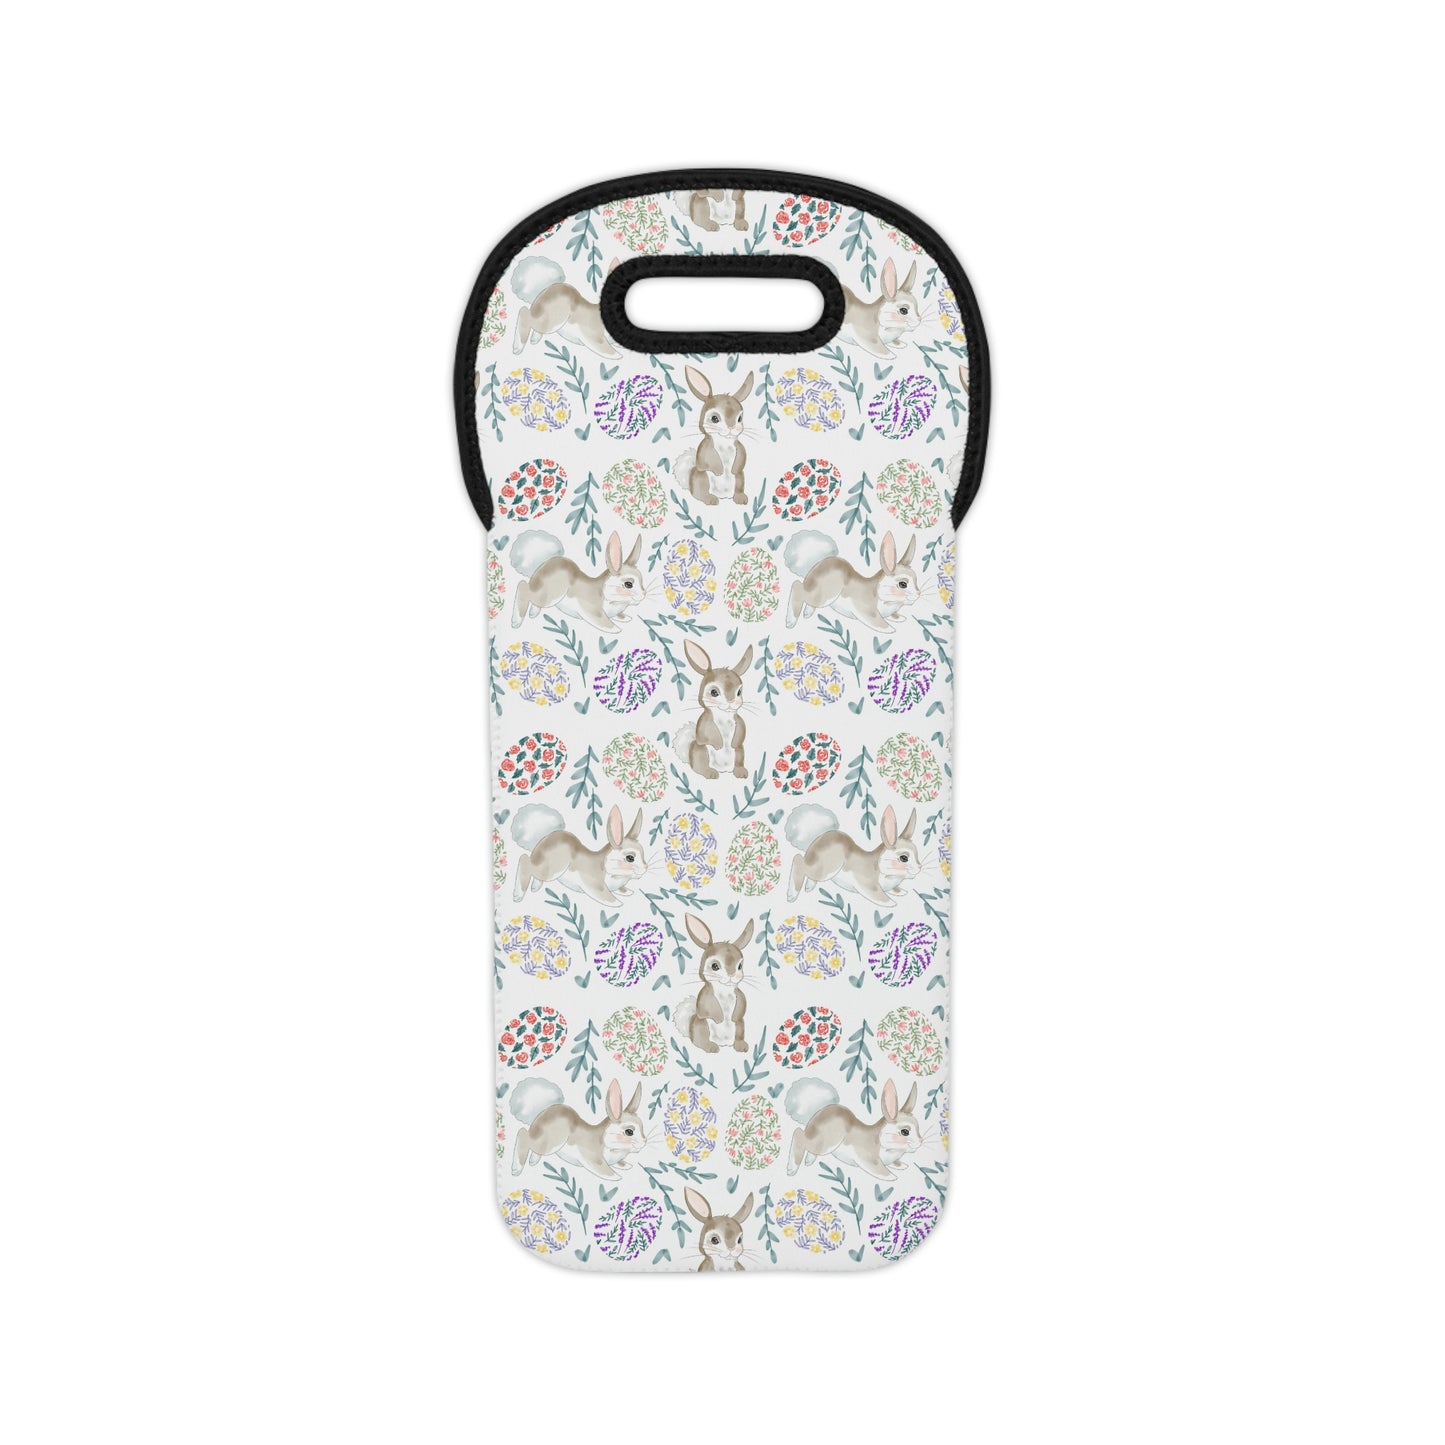 Bunnies and Easter Eggs Wine Tote Bag